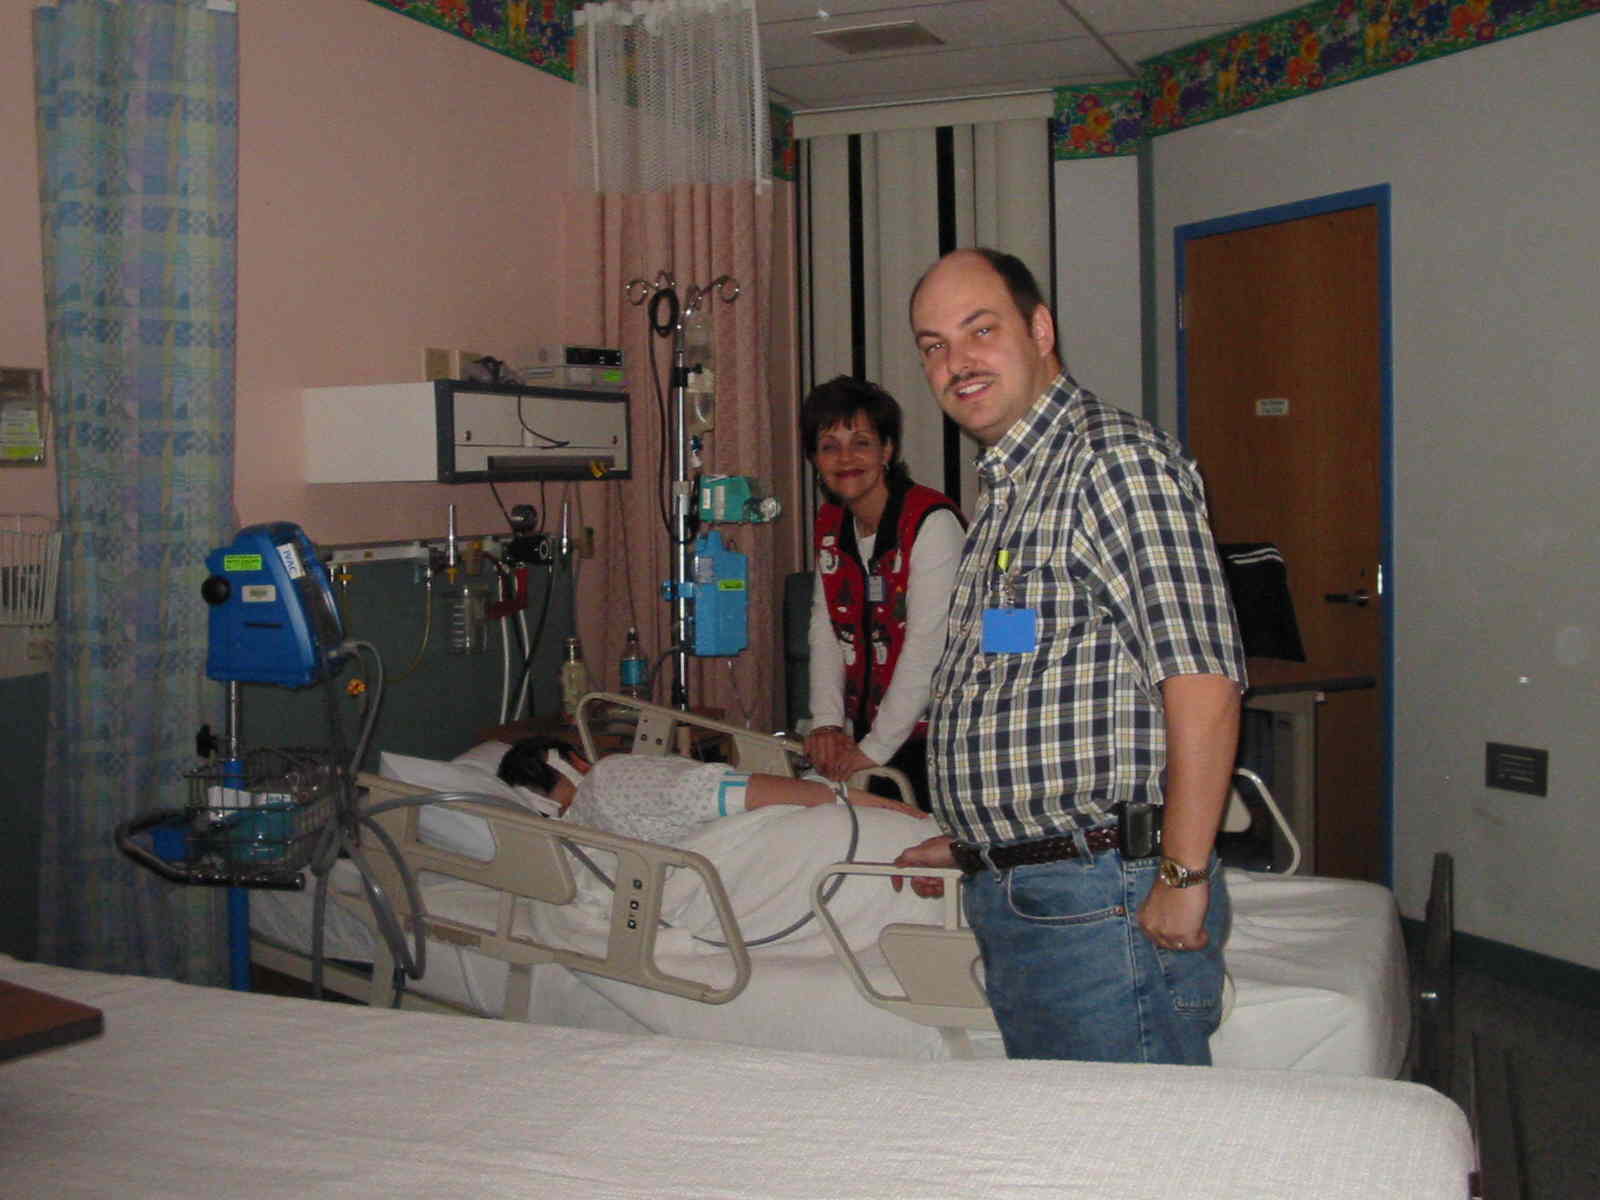 Isaac resting in a hospital bed while Doug and Marsha stand by the side of the bed